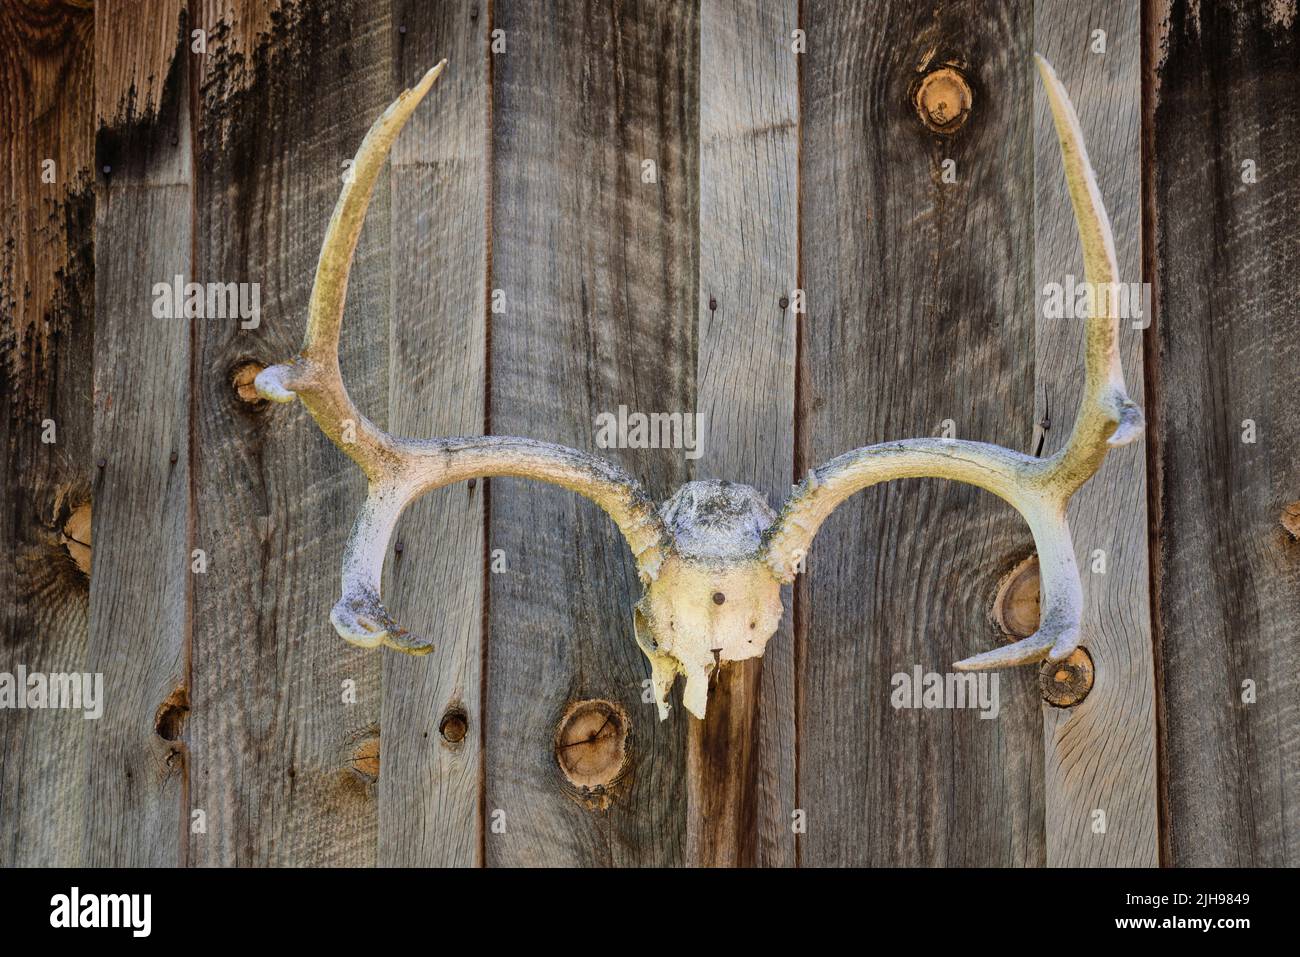 Deer antlers and skull on cabin at Historic Cant Ranch, Sheep Rock Unit, John Day Fossil Beds National Monument, Oregon. Stock Photo